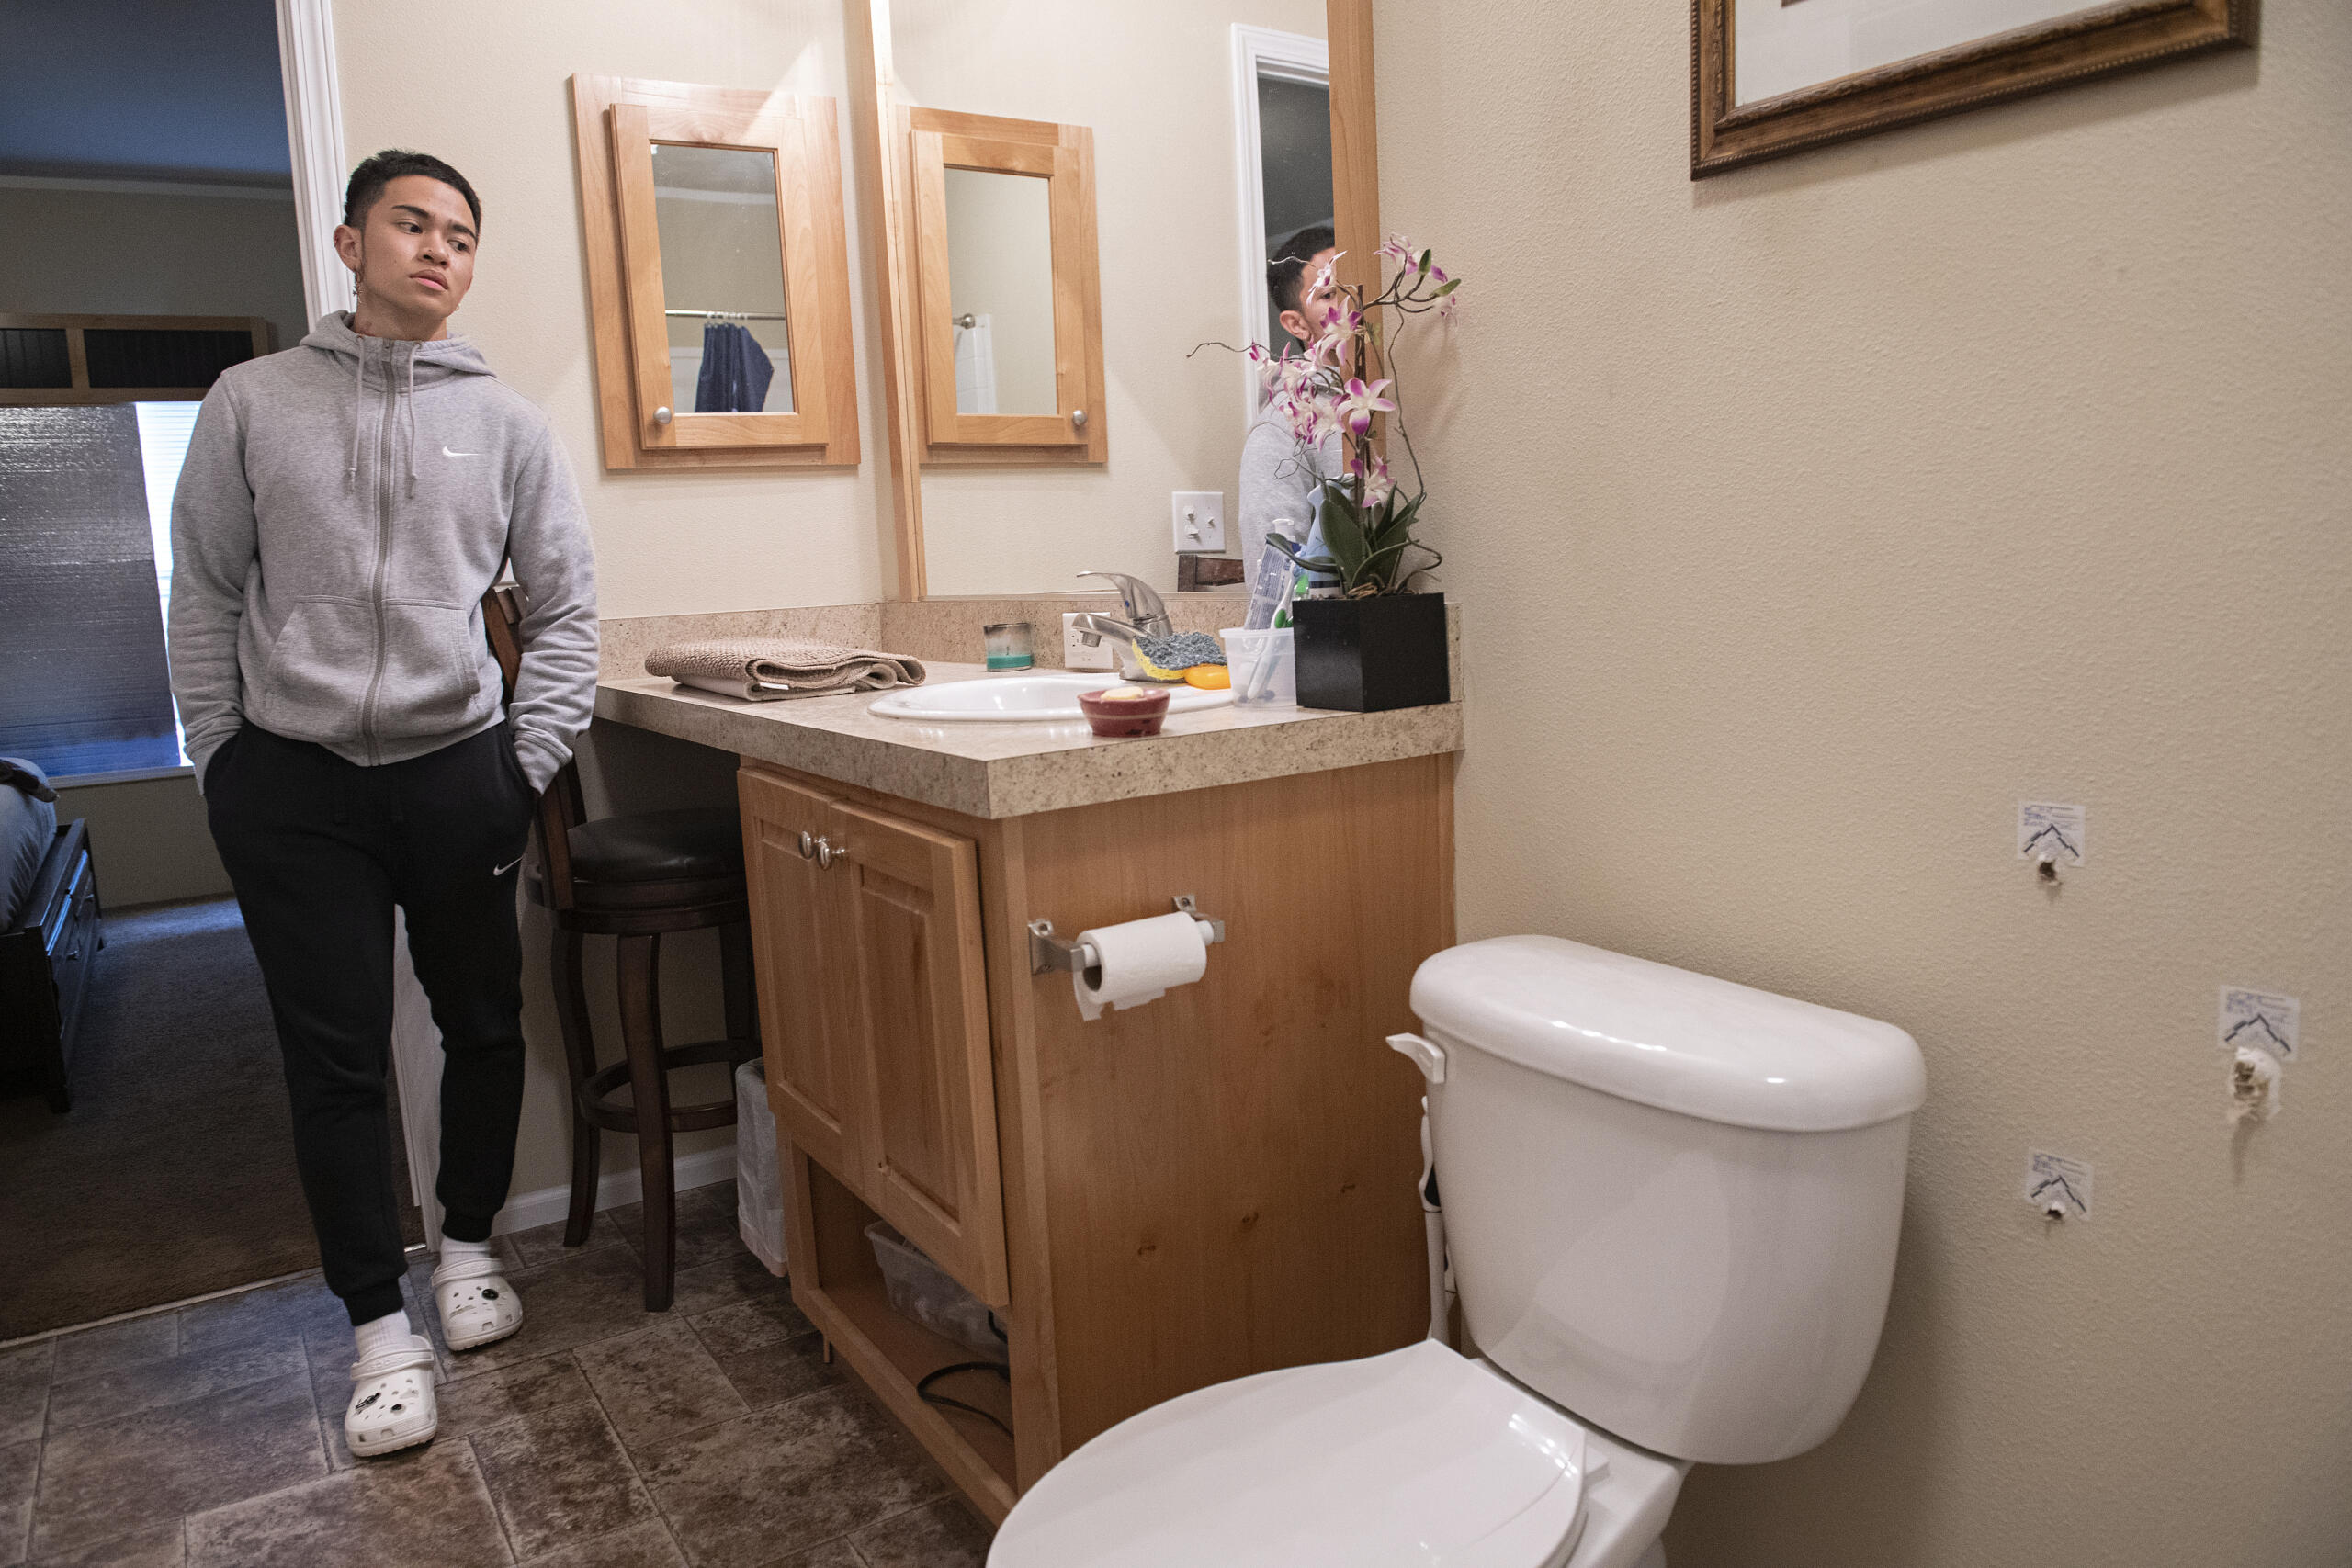 Lorenz Soriano of Vancouver looks over three bullet holes, right, in his bathroom Monday afternoon, Oct. 18, 2021, after Clark County sheriffs deputies fired at a suspect the agency said was armed with a handgun early Sunday morning.